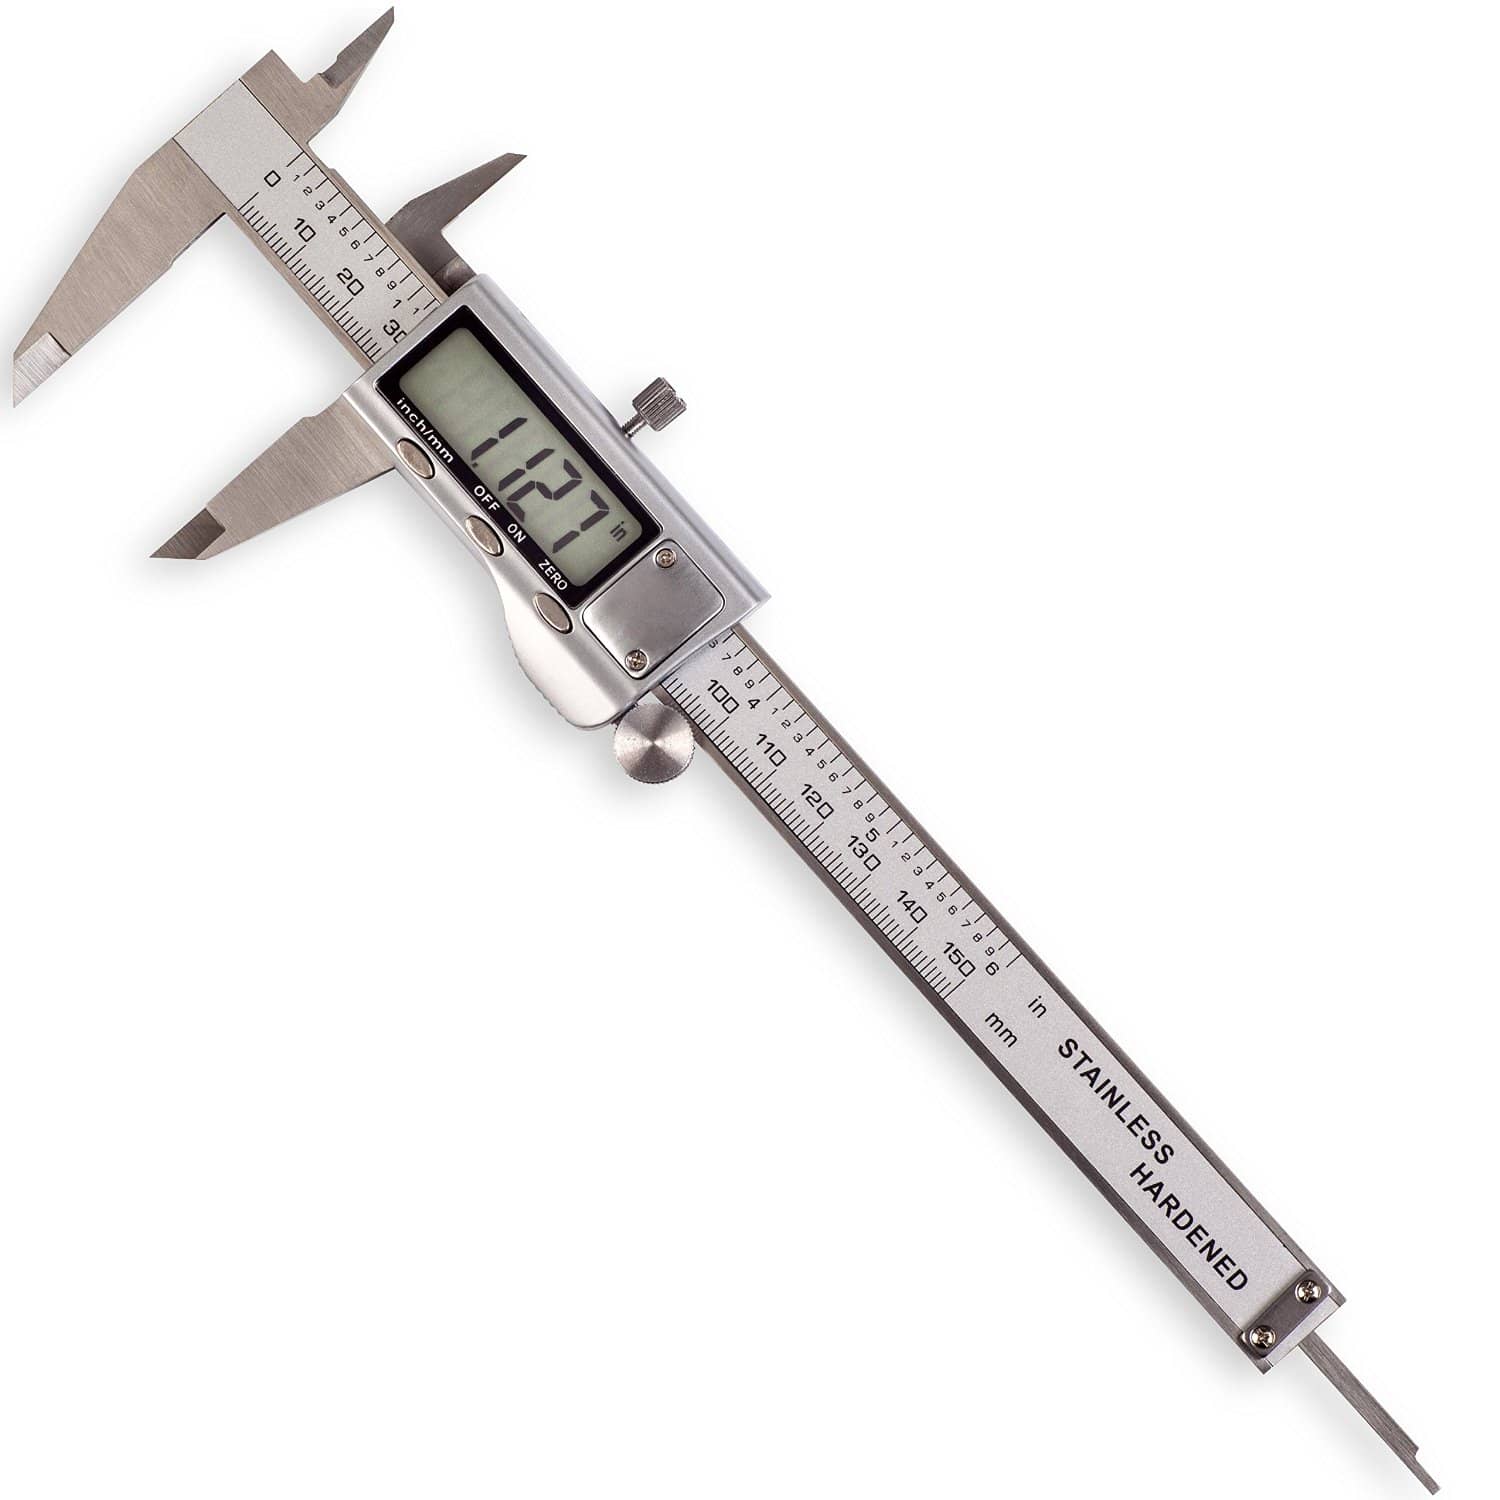 10 Best Digital Calipers For Ultimate Precision